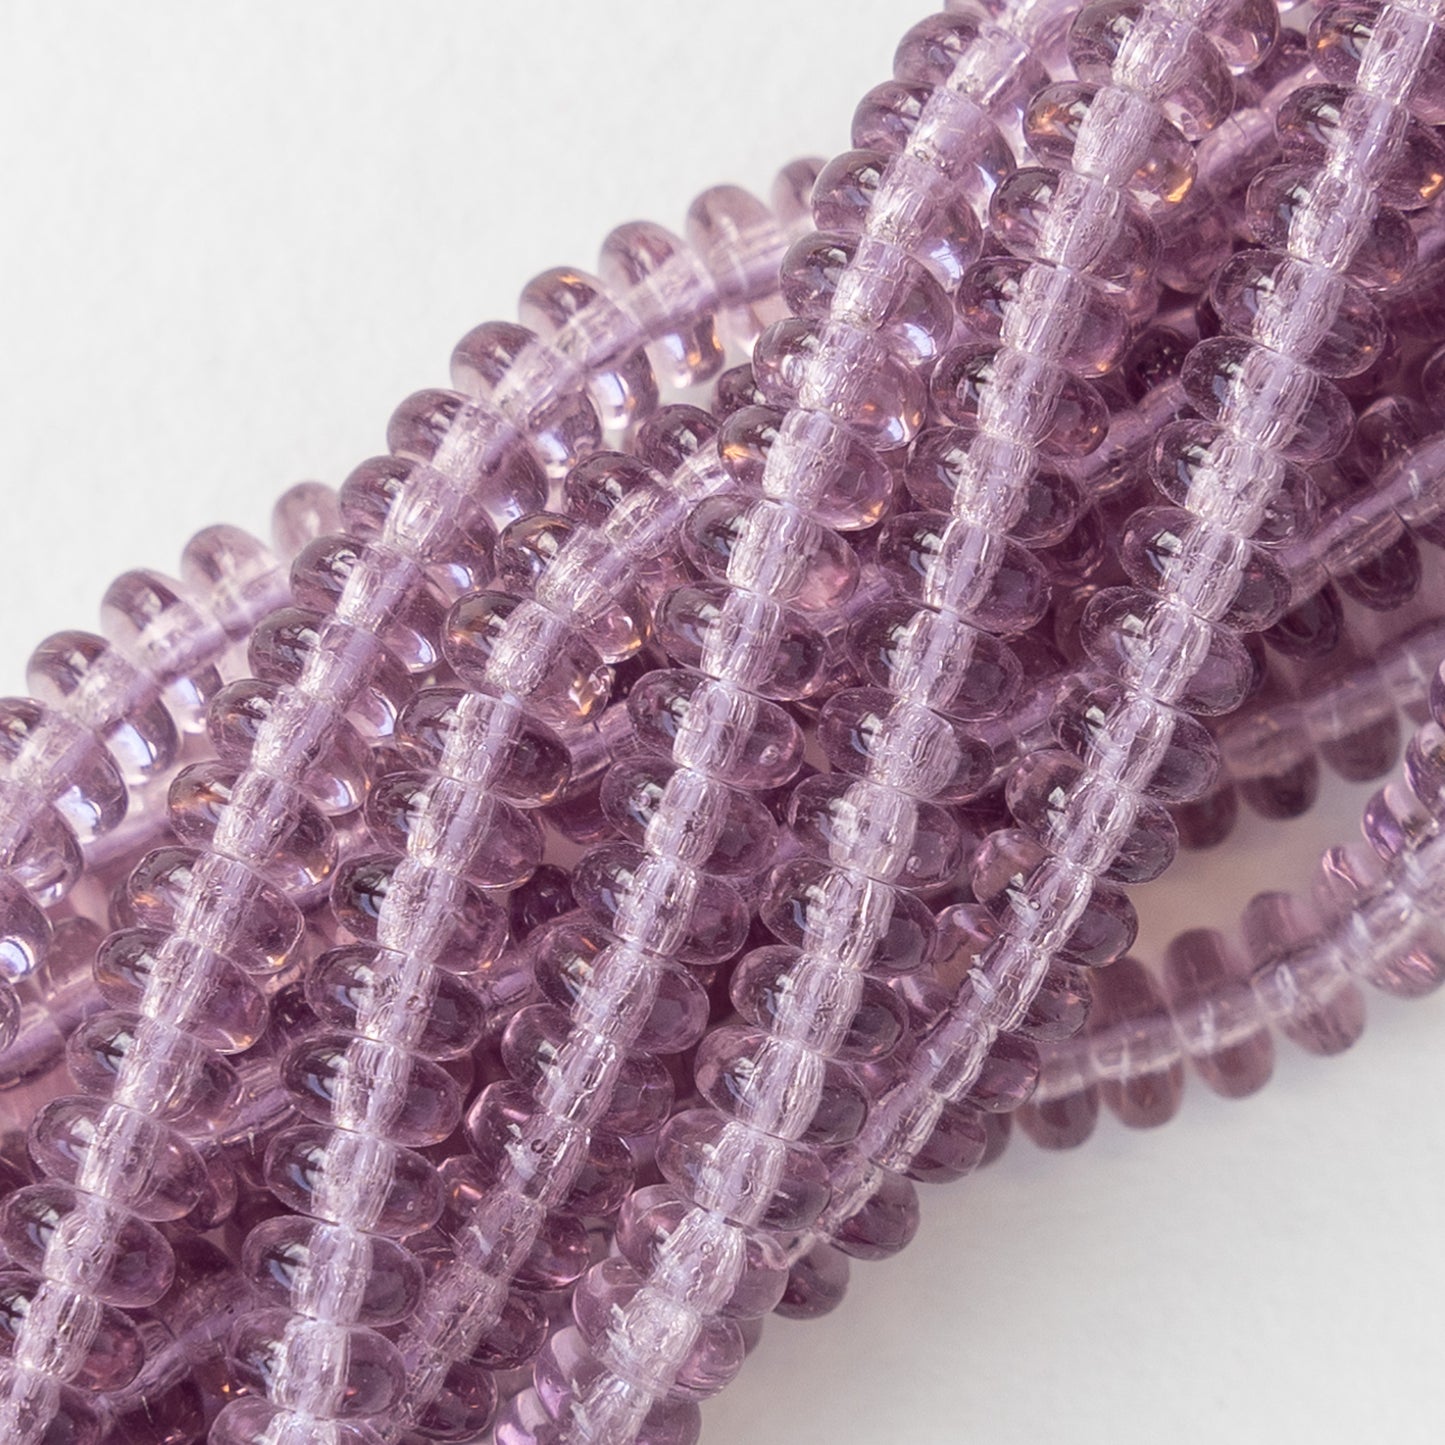 Load image into Gallery viewer, 4mm Rondelle Beads - Amethyst - 100 beads
